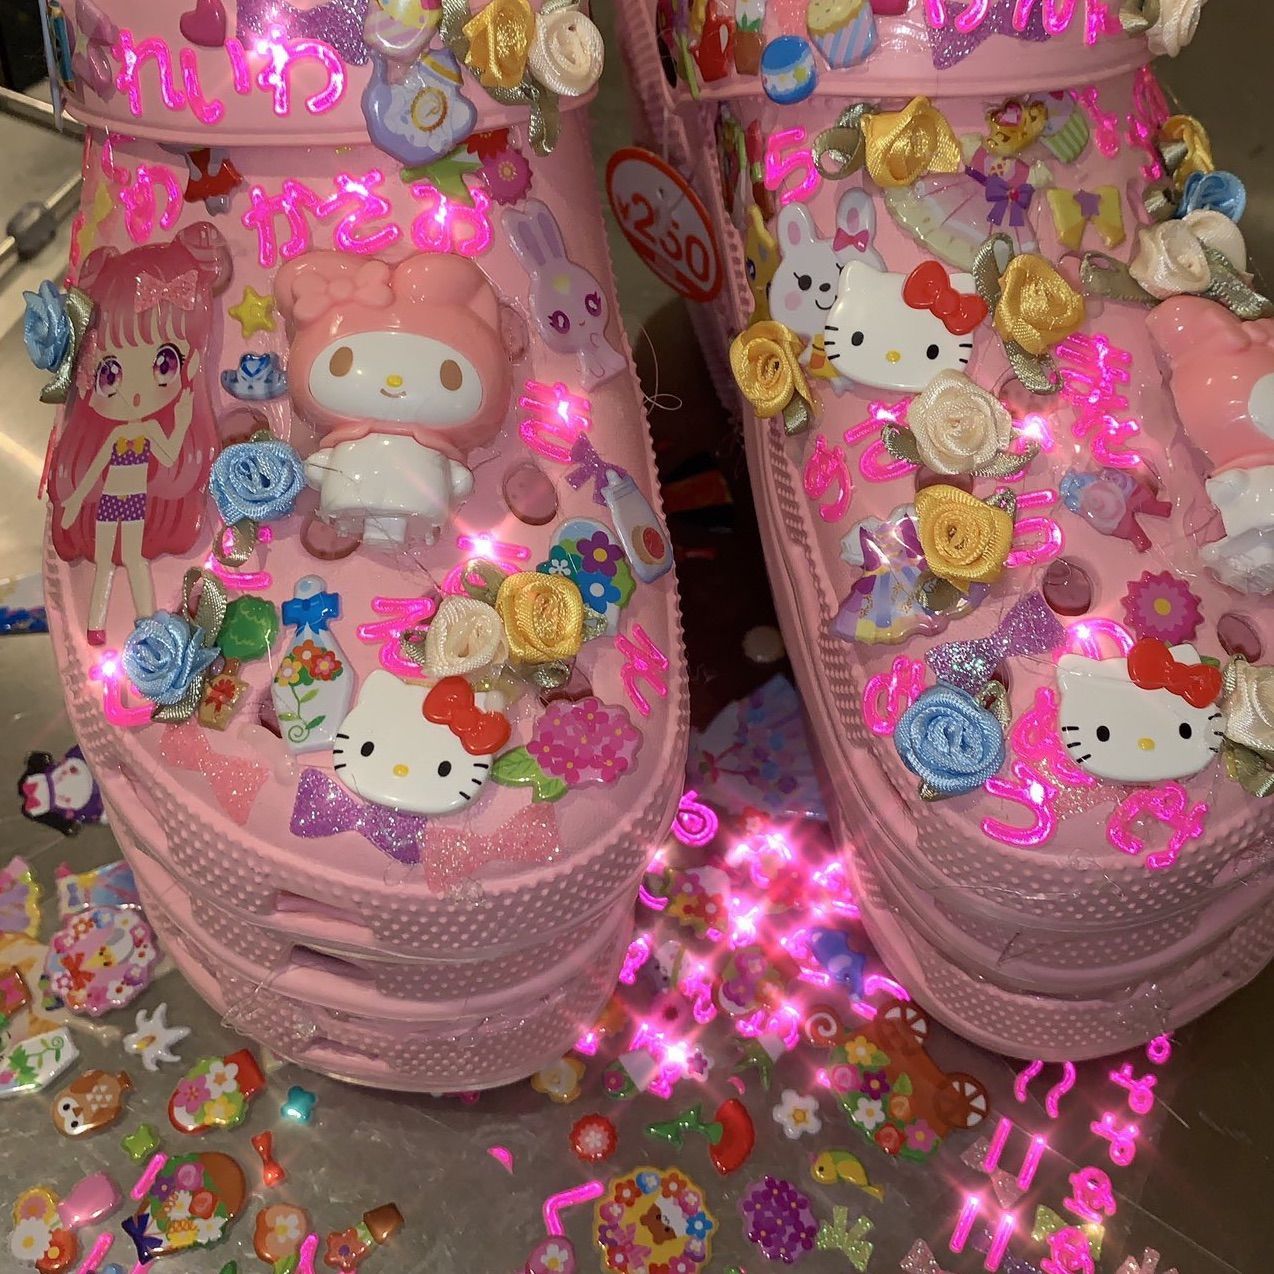 A pair of pink crocs covered in hello kitty decorations and lights - Webcore